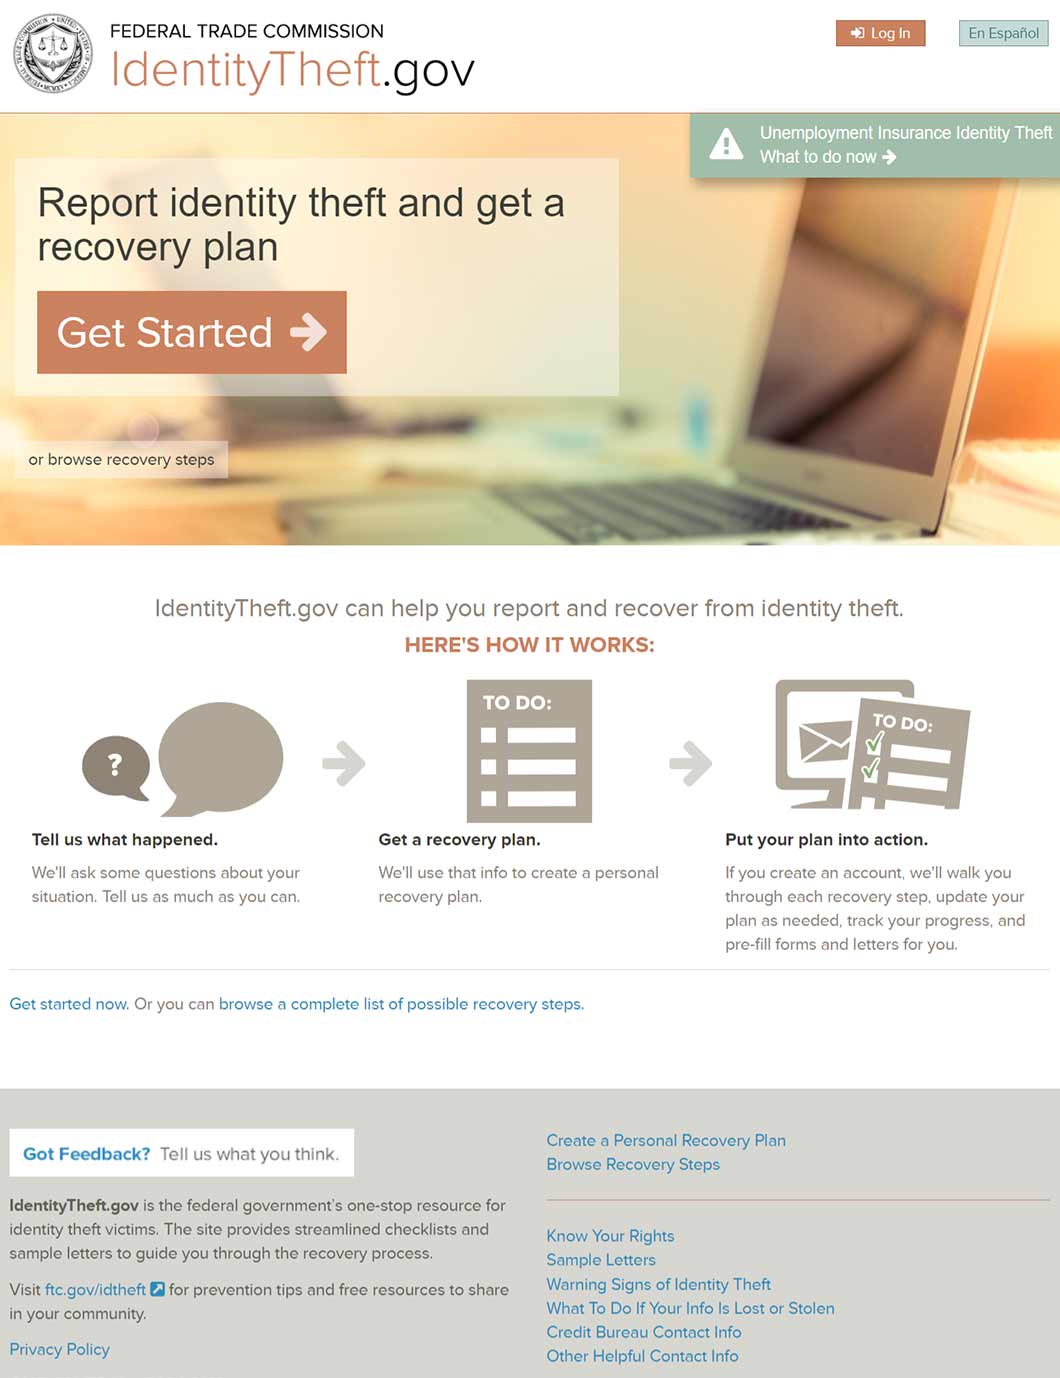 If you are scammed, file an identity theft report with the Federal Trade Commission.